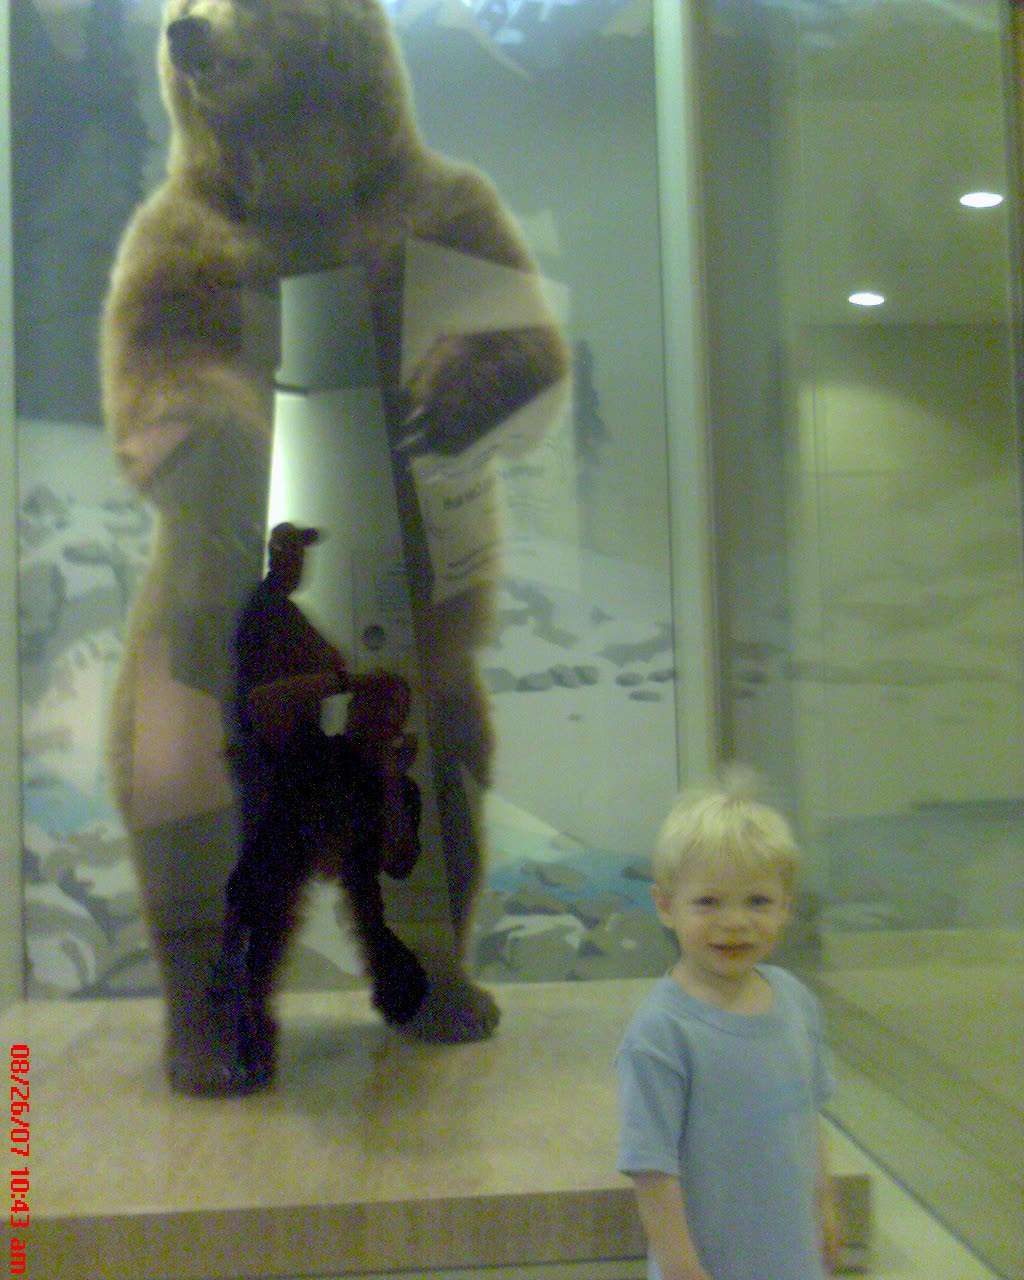 [2007+08+26,+trip+to+the+natural+history+museum,+liam+and+the+bear.jpg]